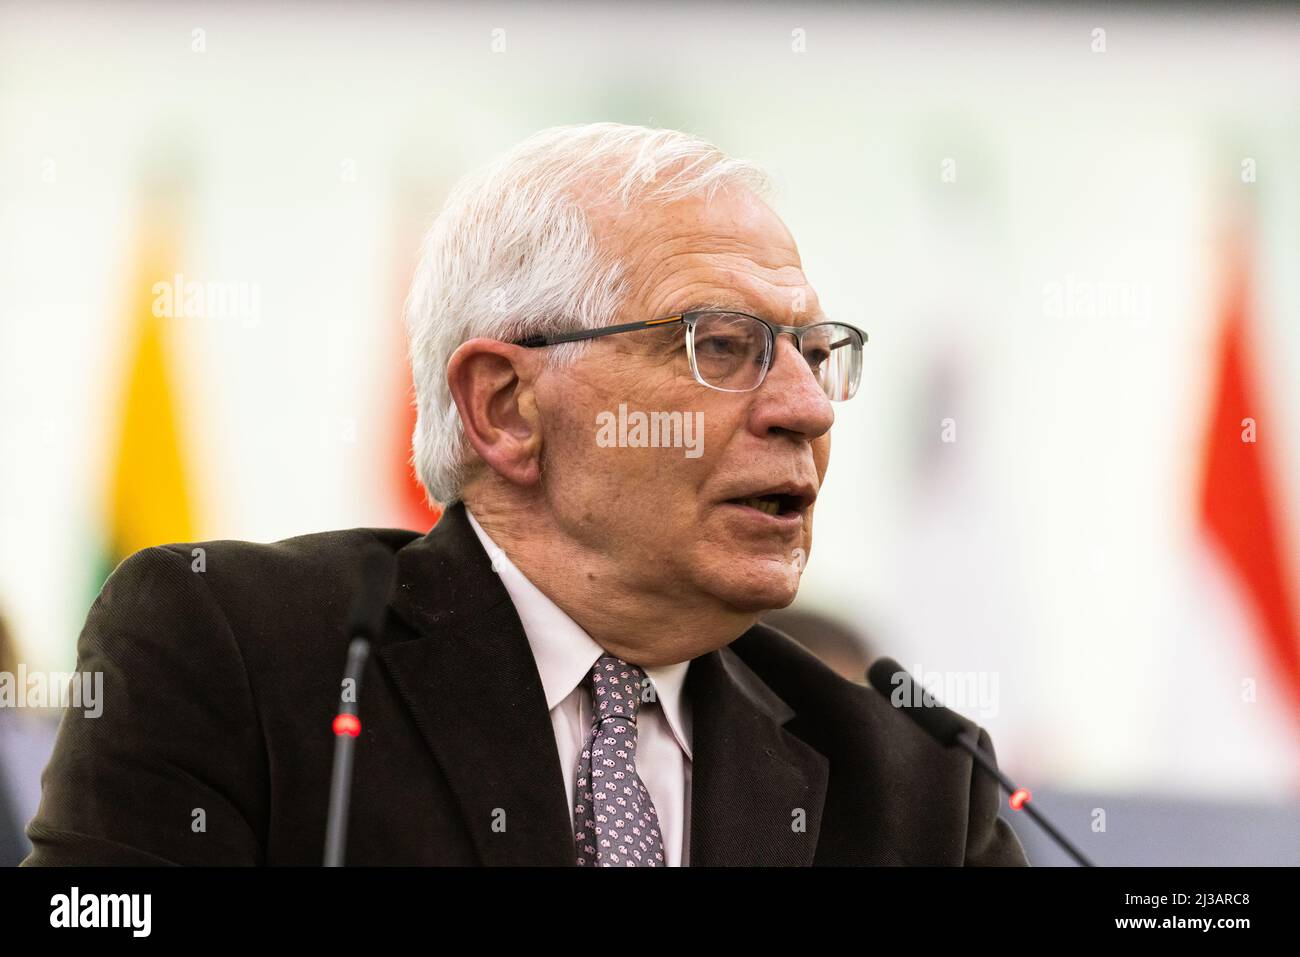 06 April 2022, France, Straßburg: Josep Borrell (PSC), EU High  Representative for Foreign Affairs and Security Policy and Vice President  of the European Commission, speaks at the plenary session of the European